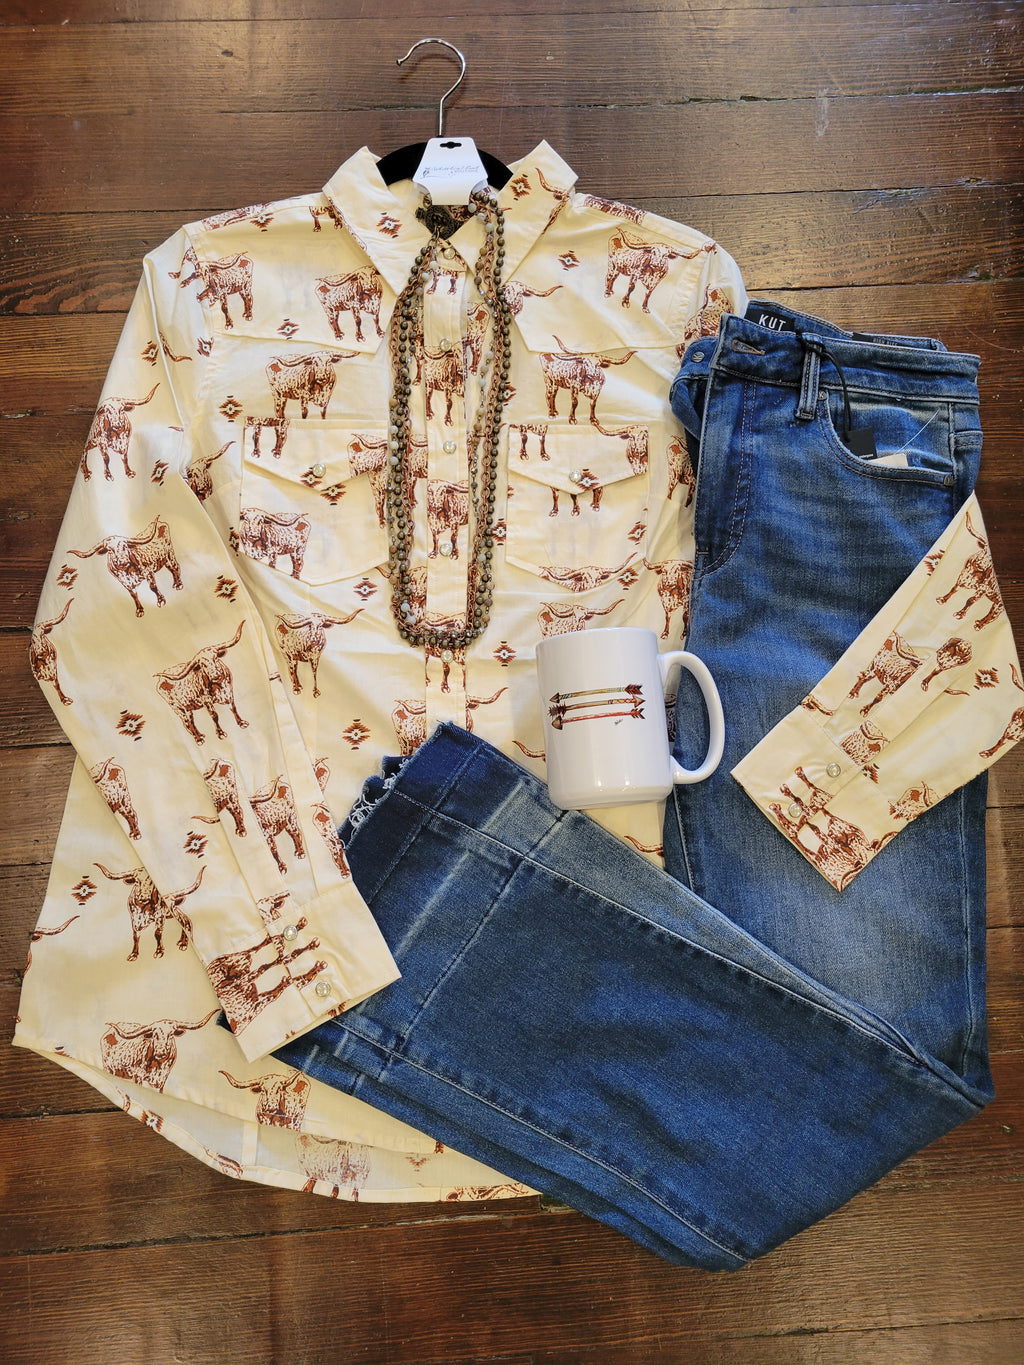 Longhorn shirt paired with denim and a arrows coffee mug